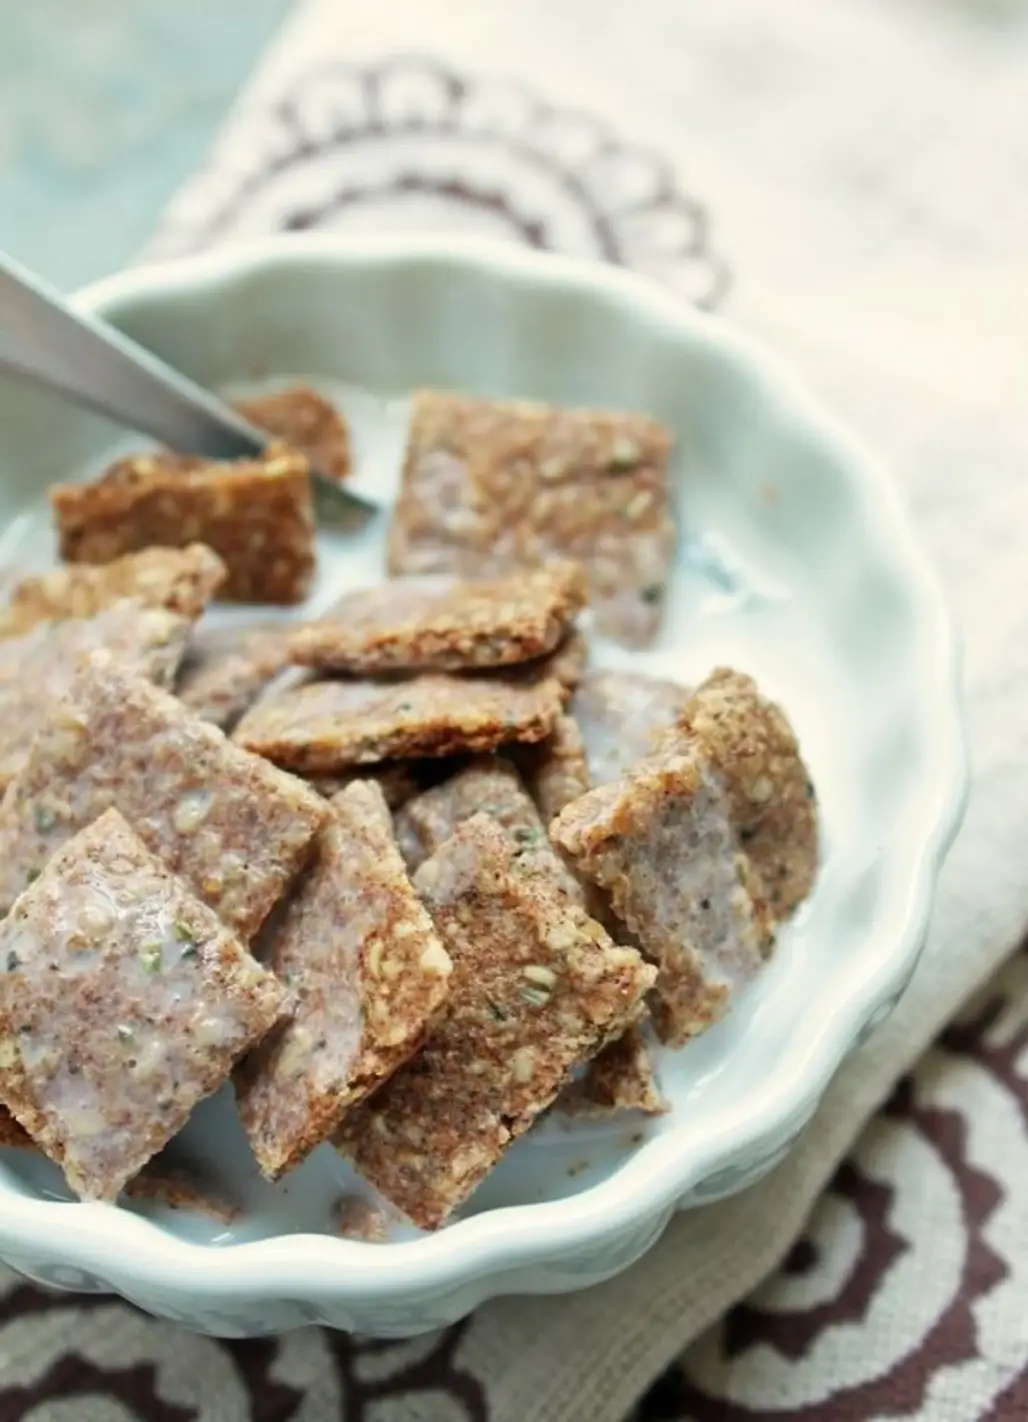 Cinnamon Faux-st Crunch Cereal